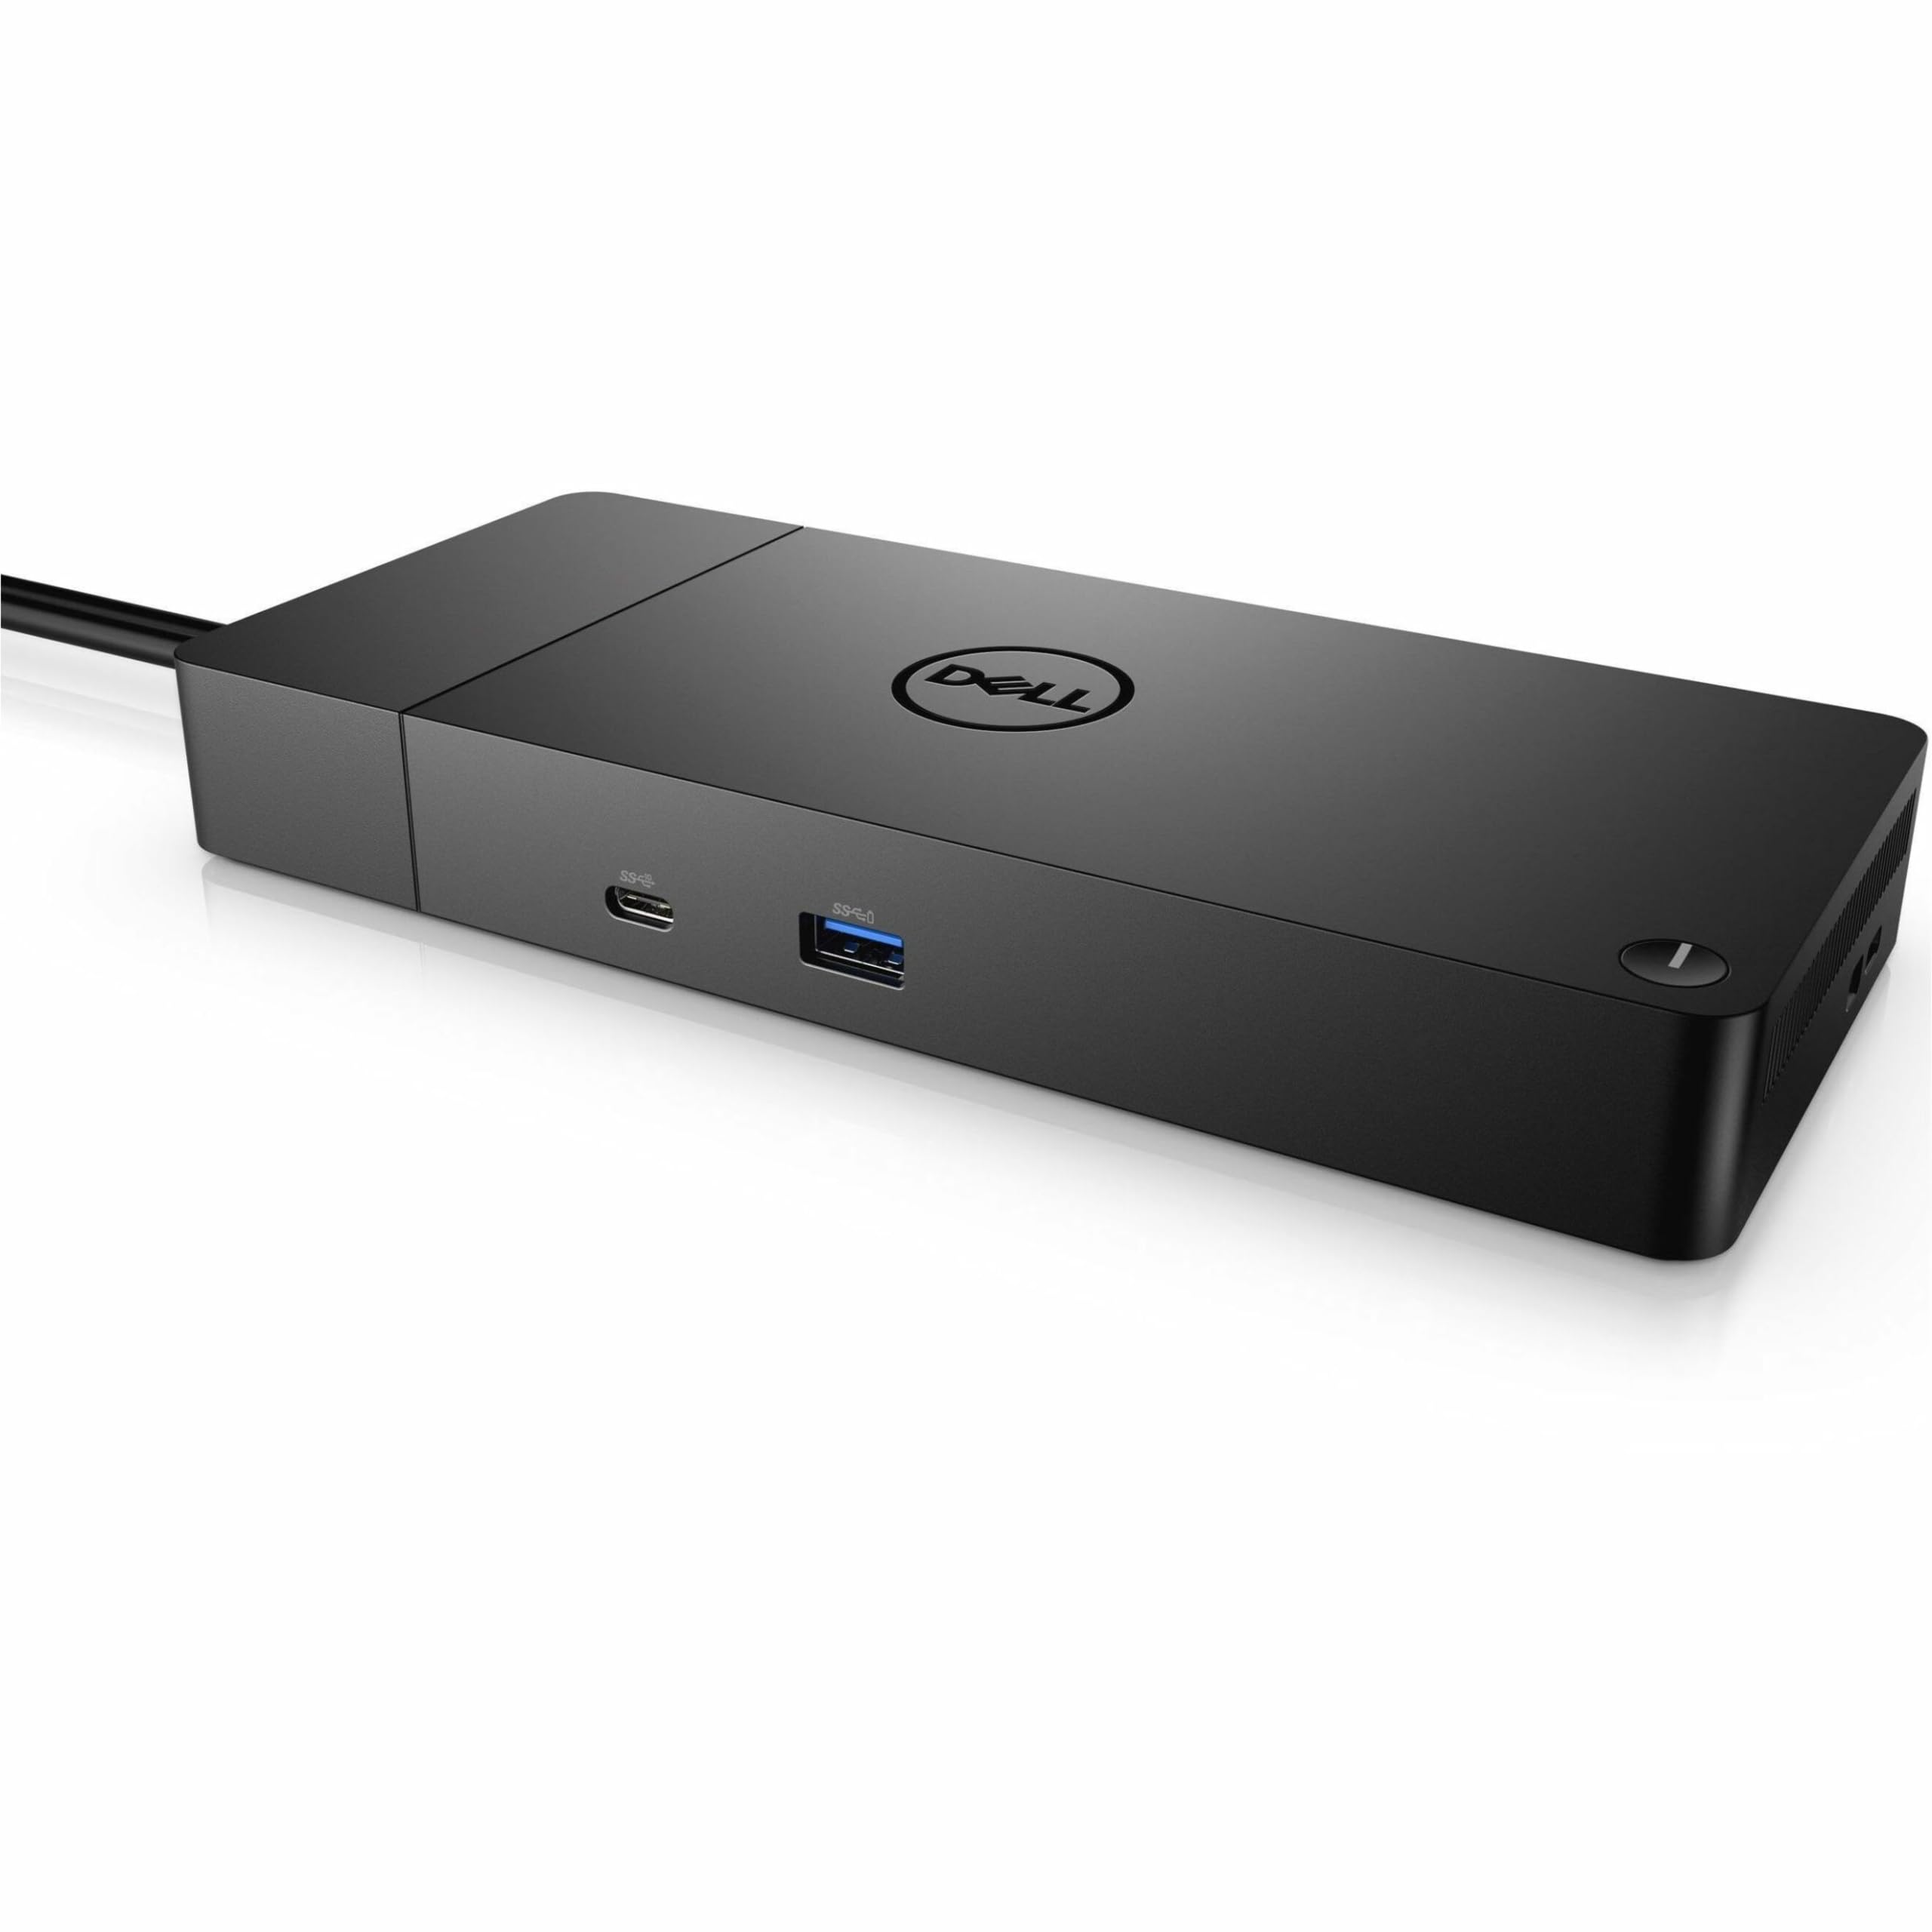 Dell Precision 5510 docking station with error message